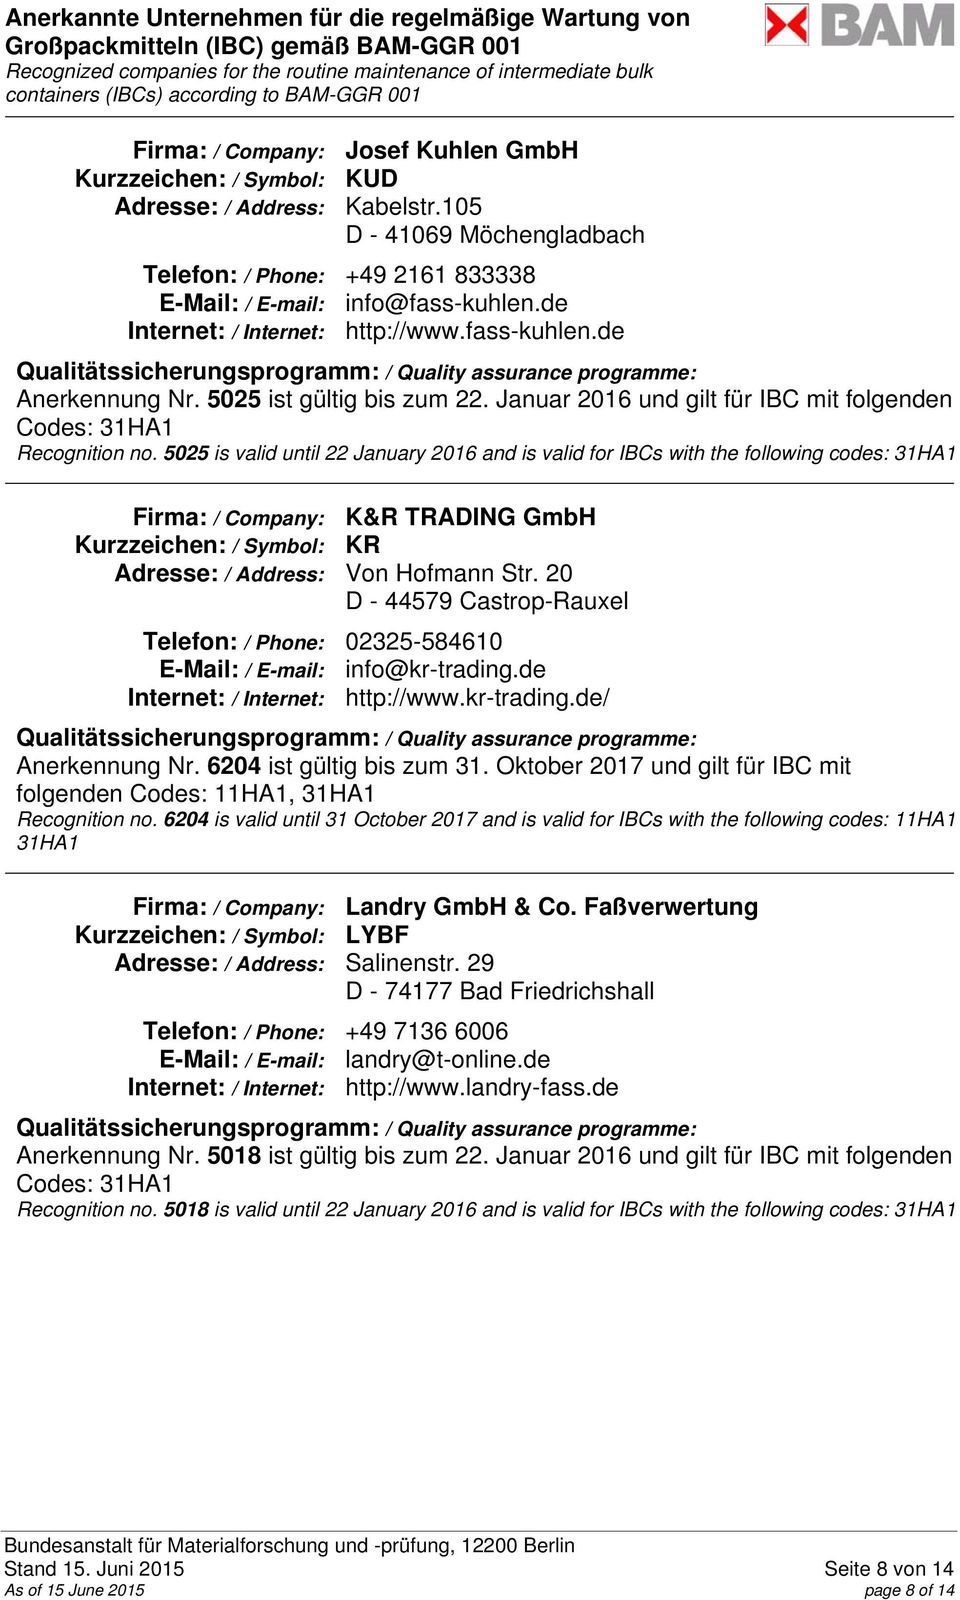 5025 is valid until 22 January 2016 and is valid for IBCs with the following codes: 31HA1 Firma: / Company: K&R TRADING GmbH Kurzzeichen: / Symbol: KR Adresse: / Address: Von Hofmann Str.